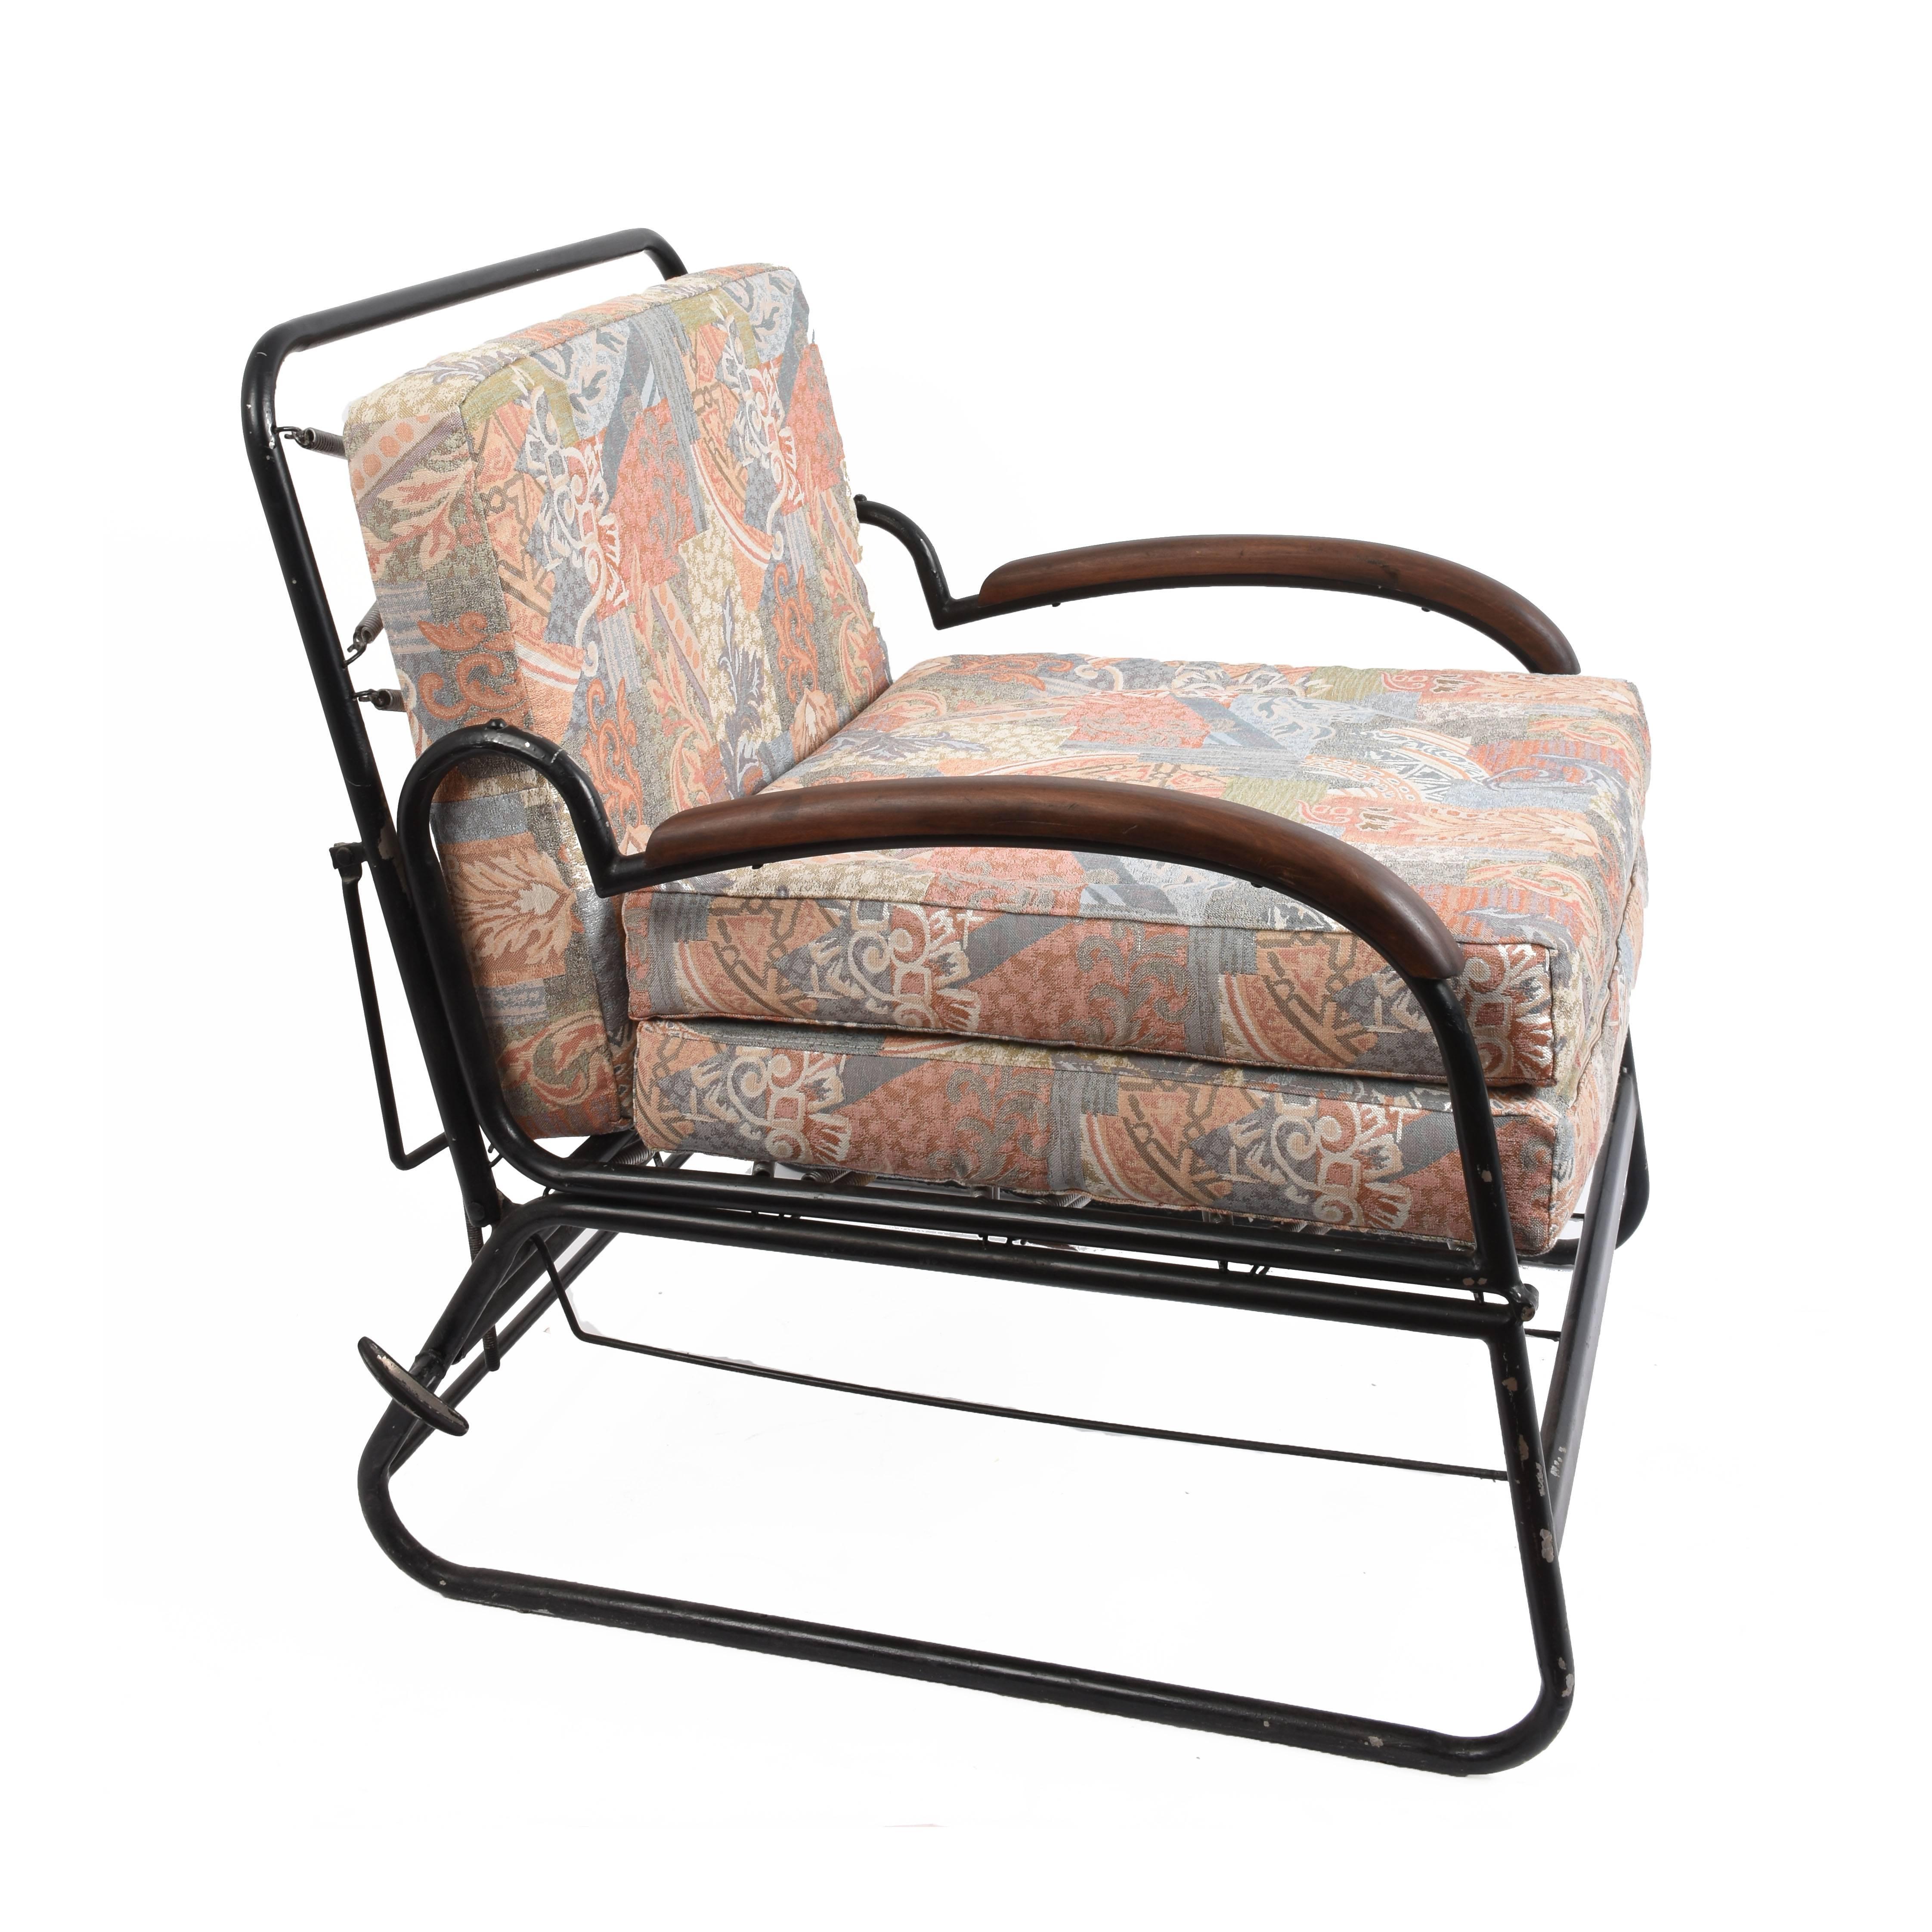 Wonderful adjustable Art Deco bed armchair in curved metal with wooden armrests. 

It can be used as an armchair or a bed and its lines and design it is clearly inspired by Marcel Breuer.

Published in 